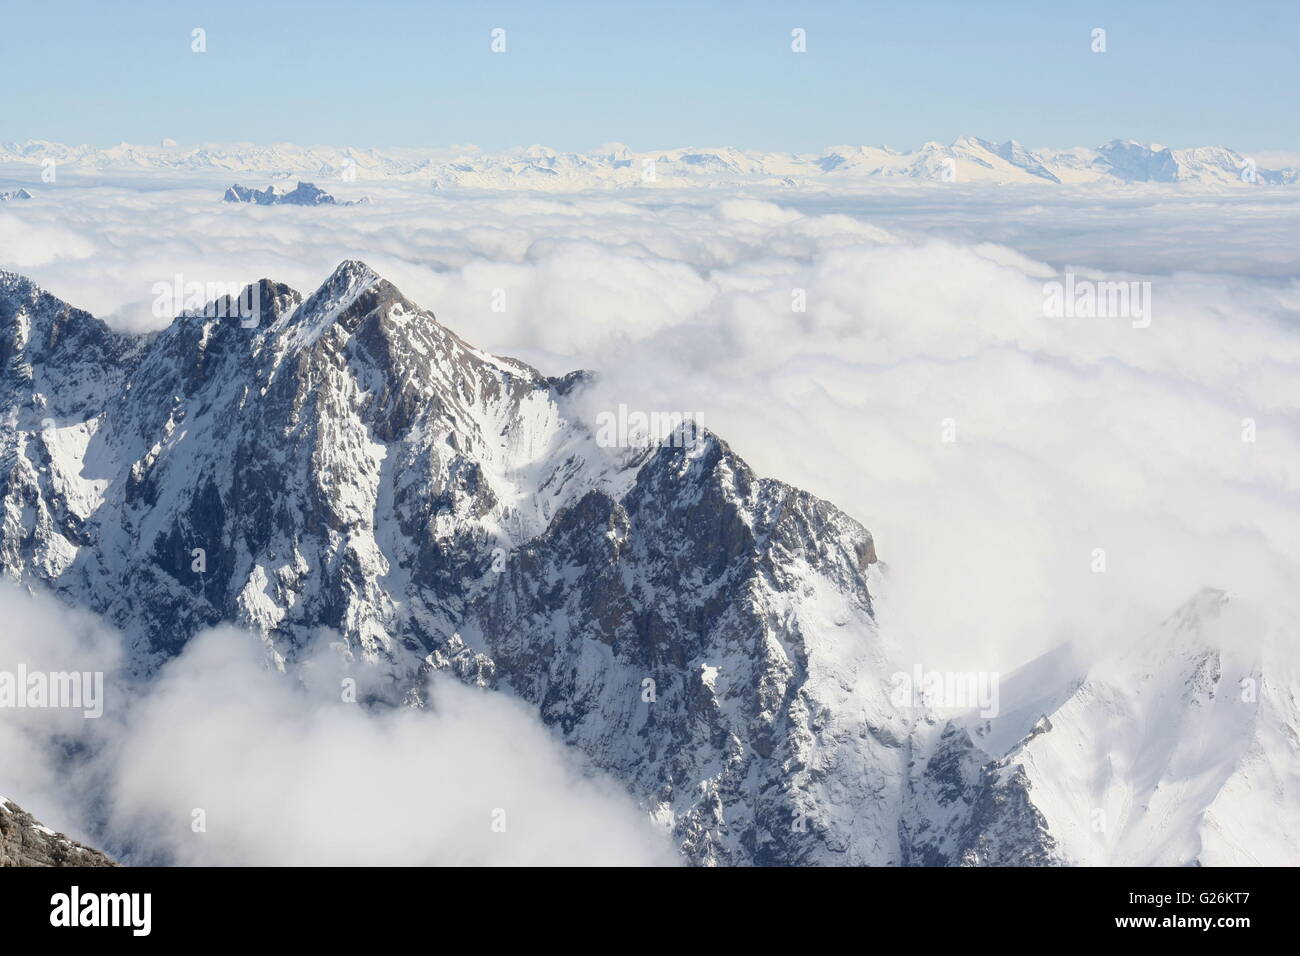 Mountain peaks rise above the clouds, Zugspitze, Germany. Stock Photo